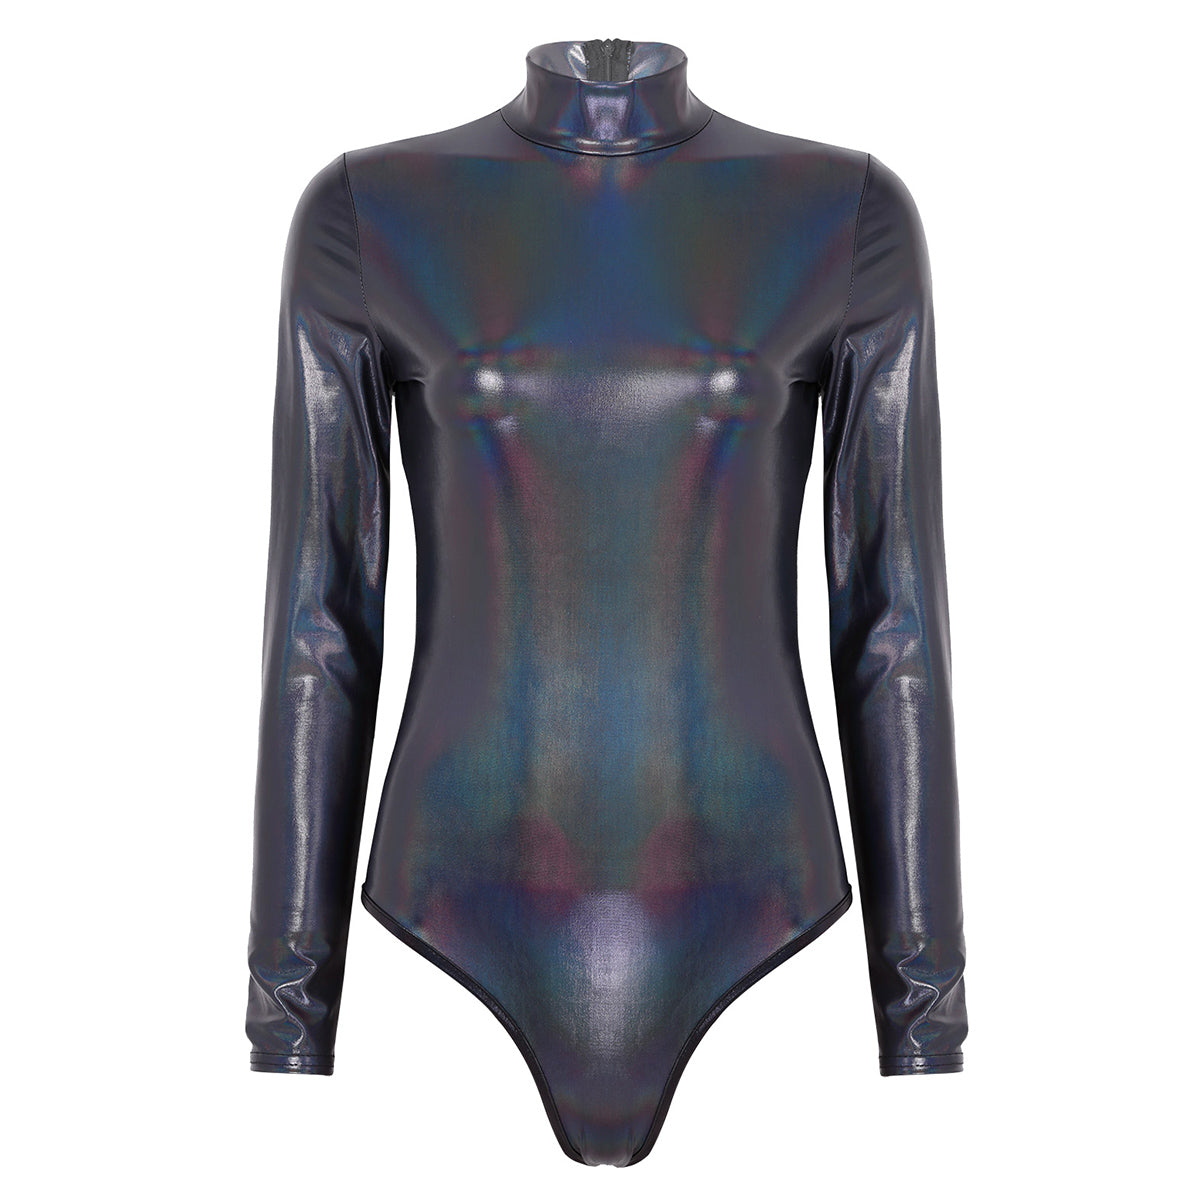 Fashionable and simple Maramalive™ women's shiny bodysuits in different colors, made of patent leather.